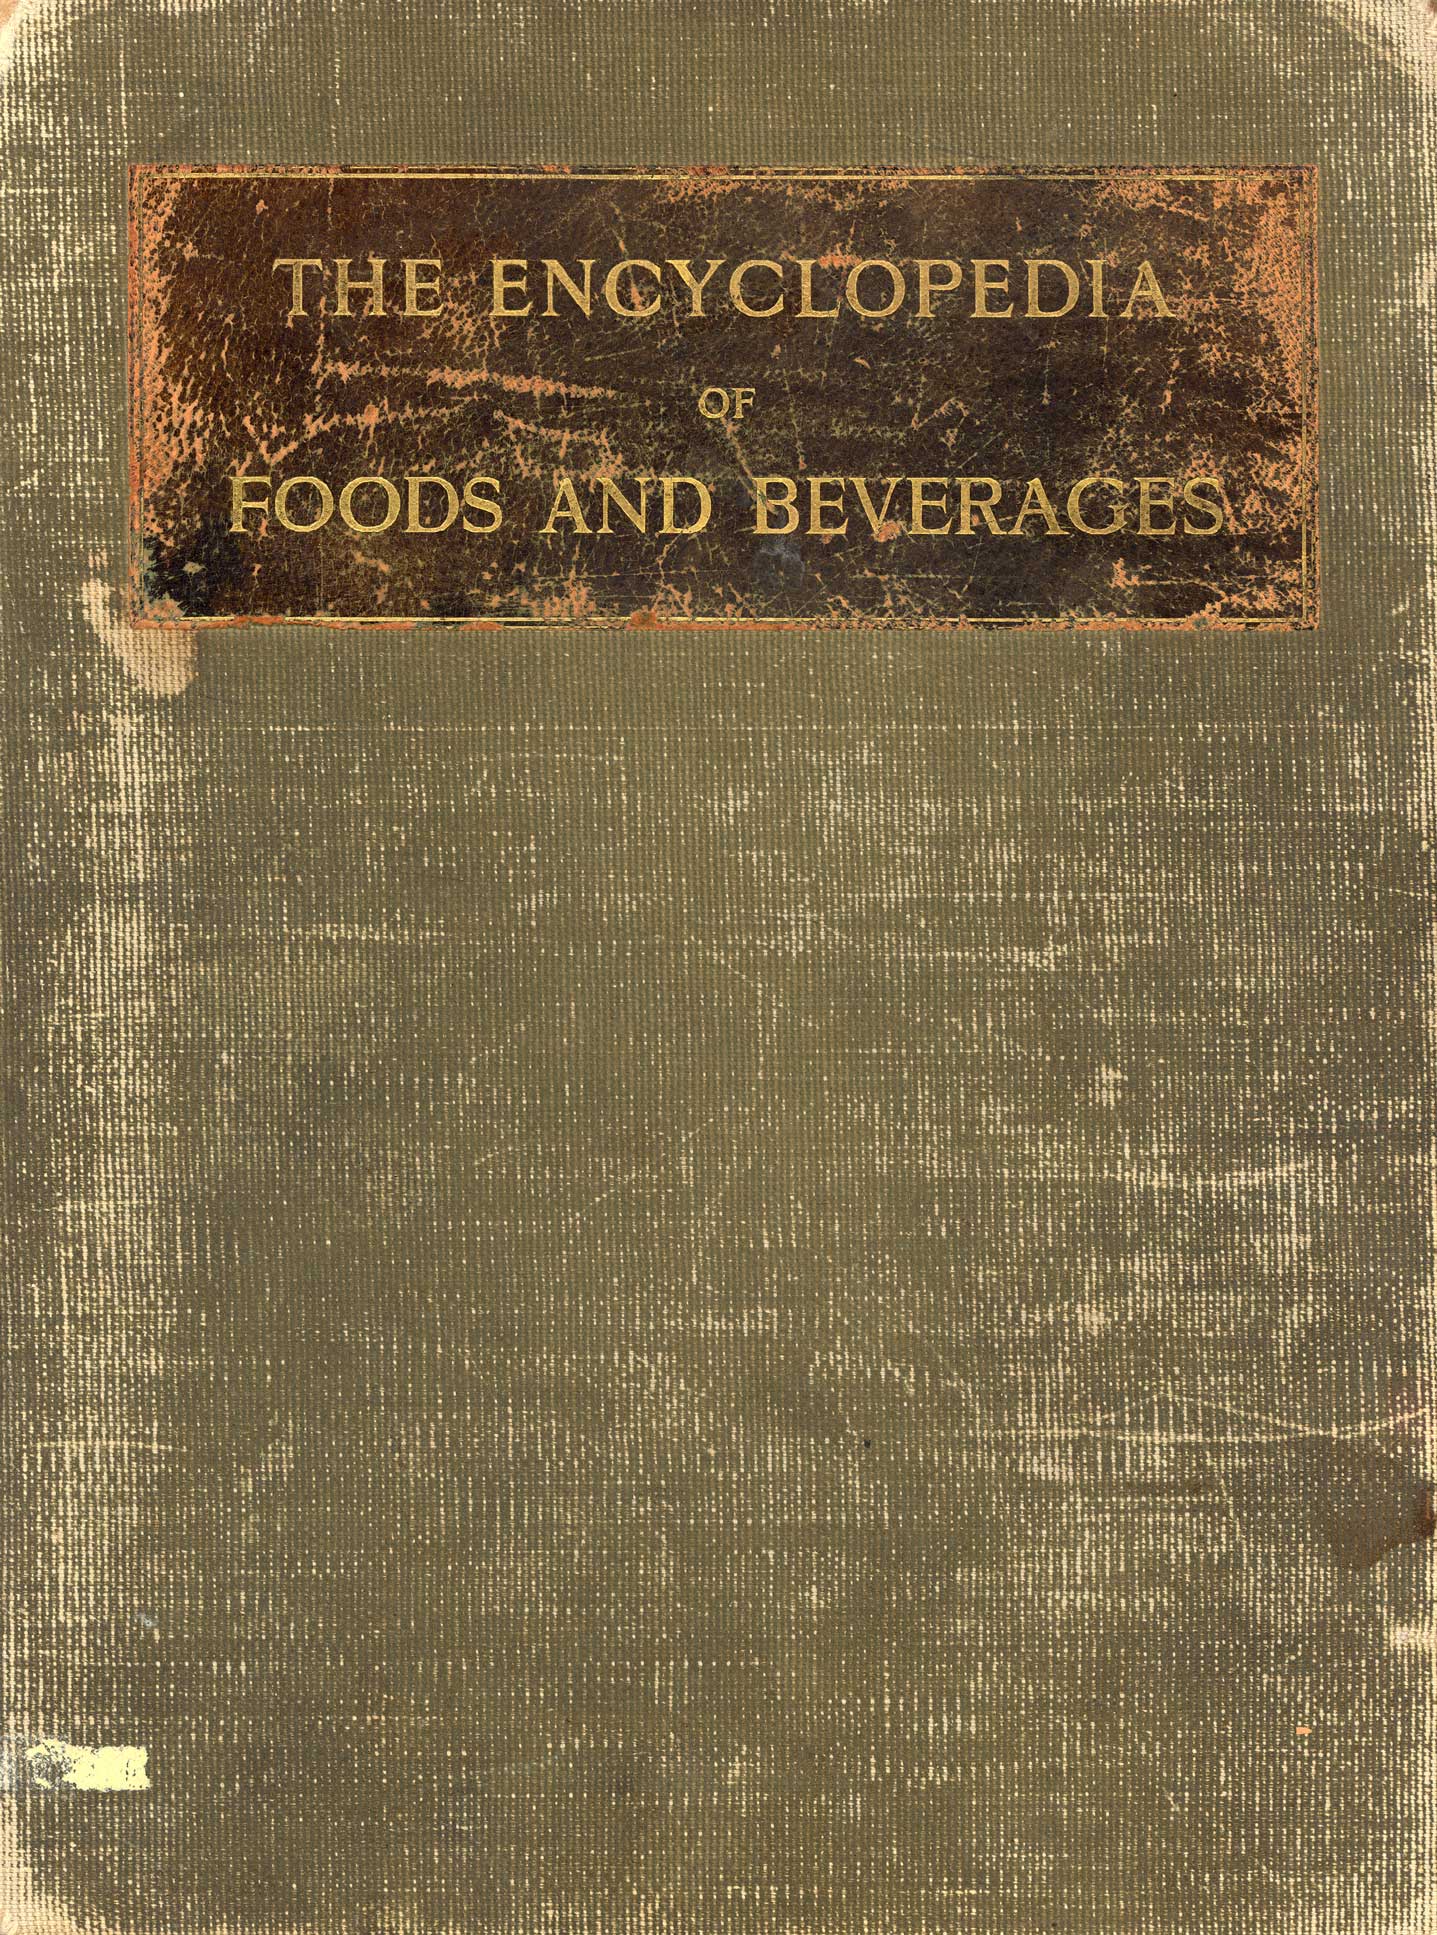 The grocer's encyclopedia